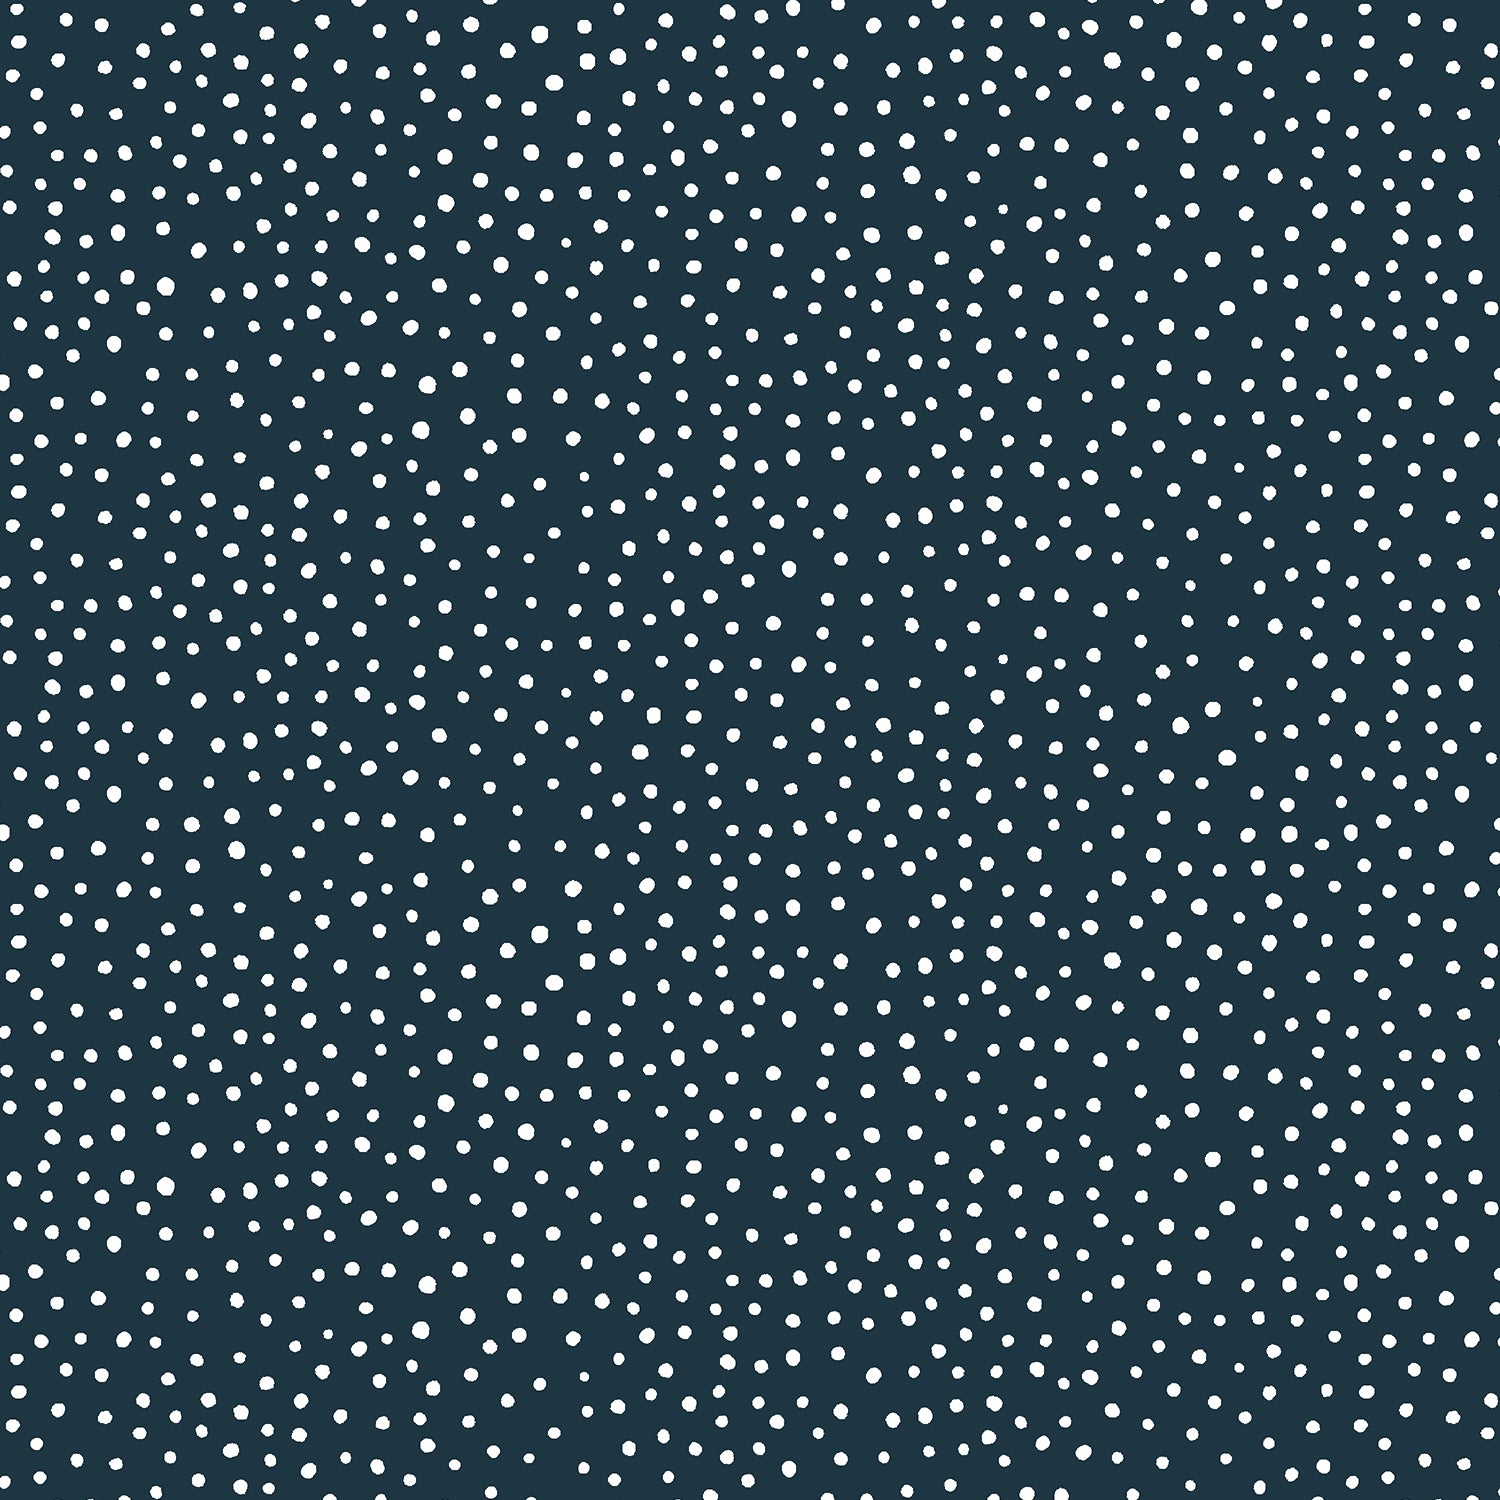 Happiest Dots - Navy Fabric